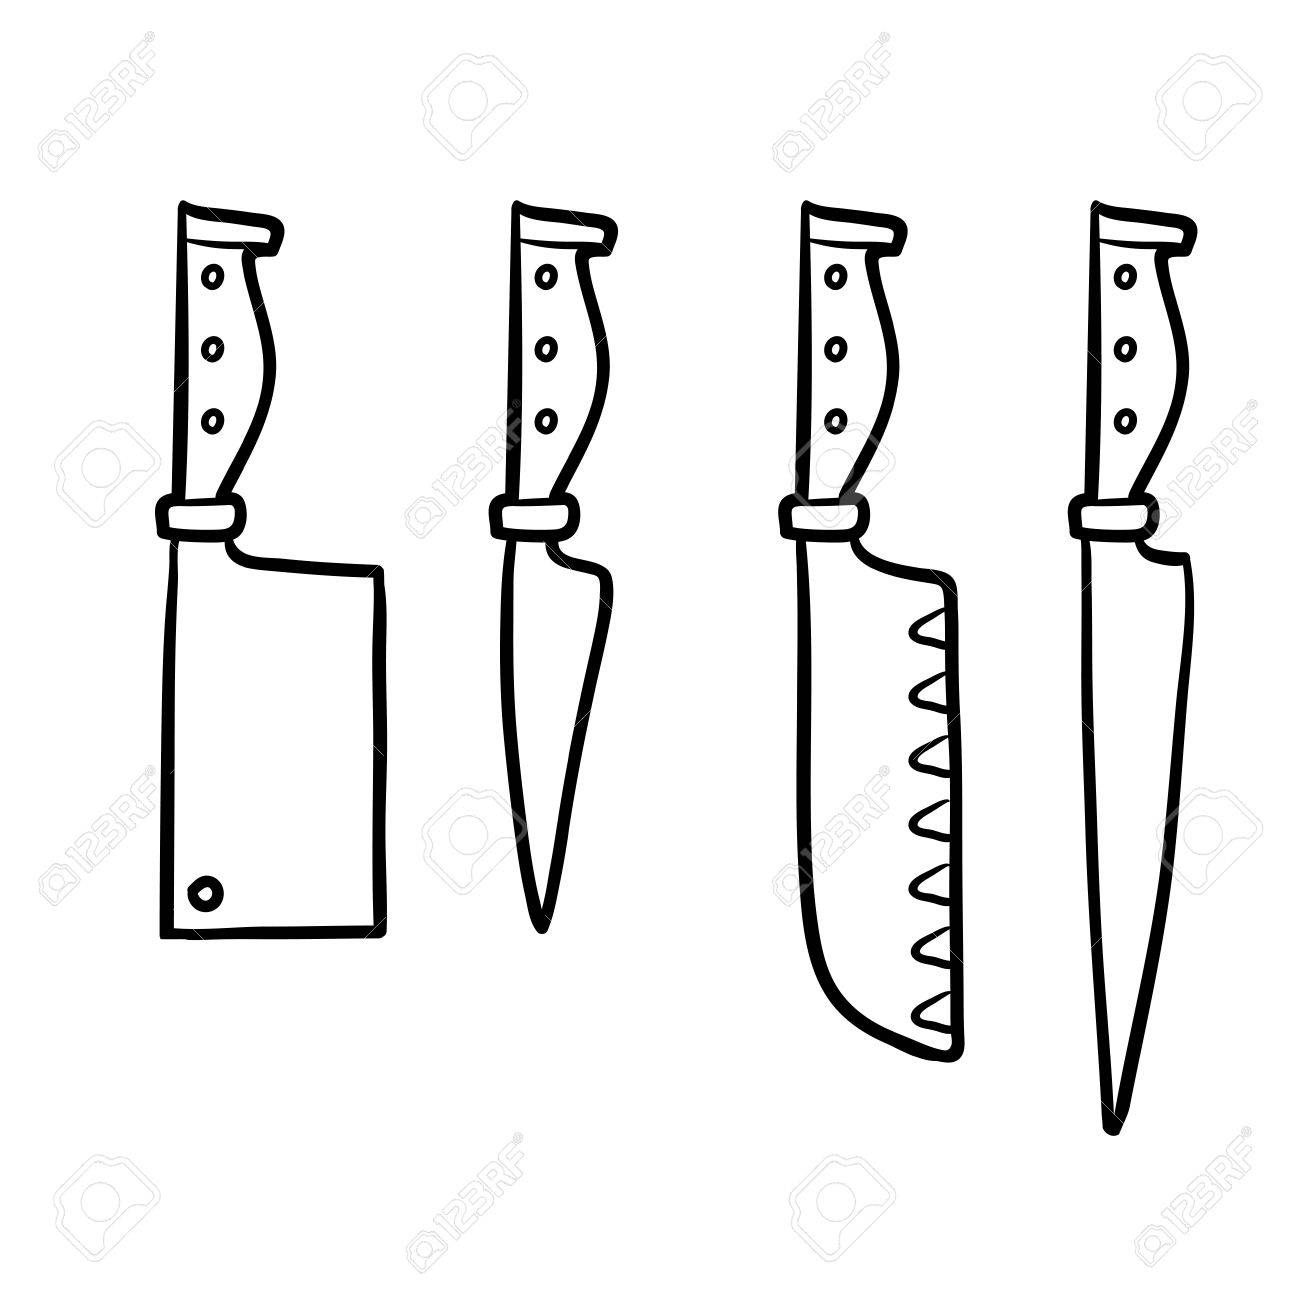 Coloring book for children set of knives royalty free svg cliparts vectors and stock illustration image